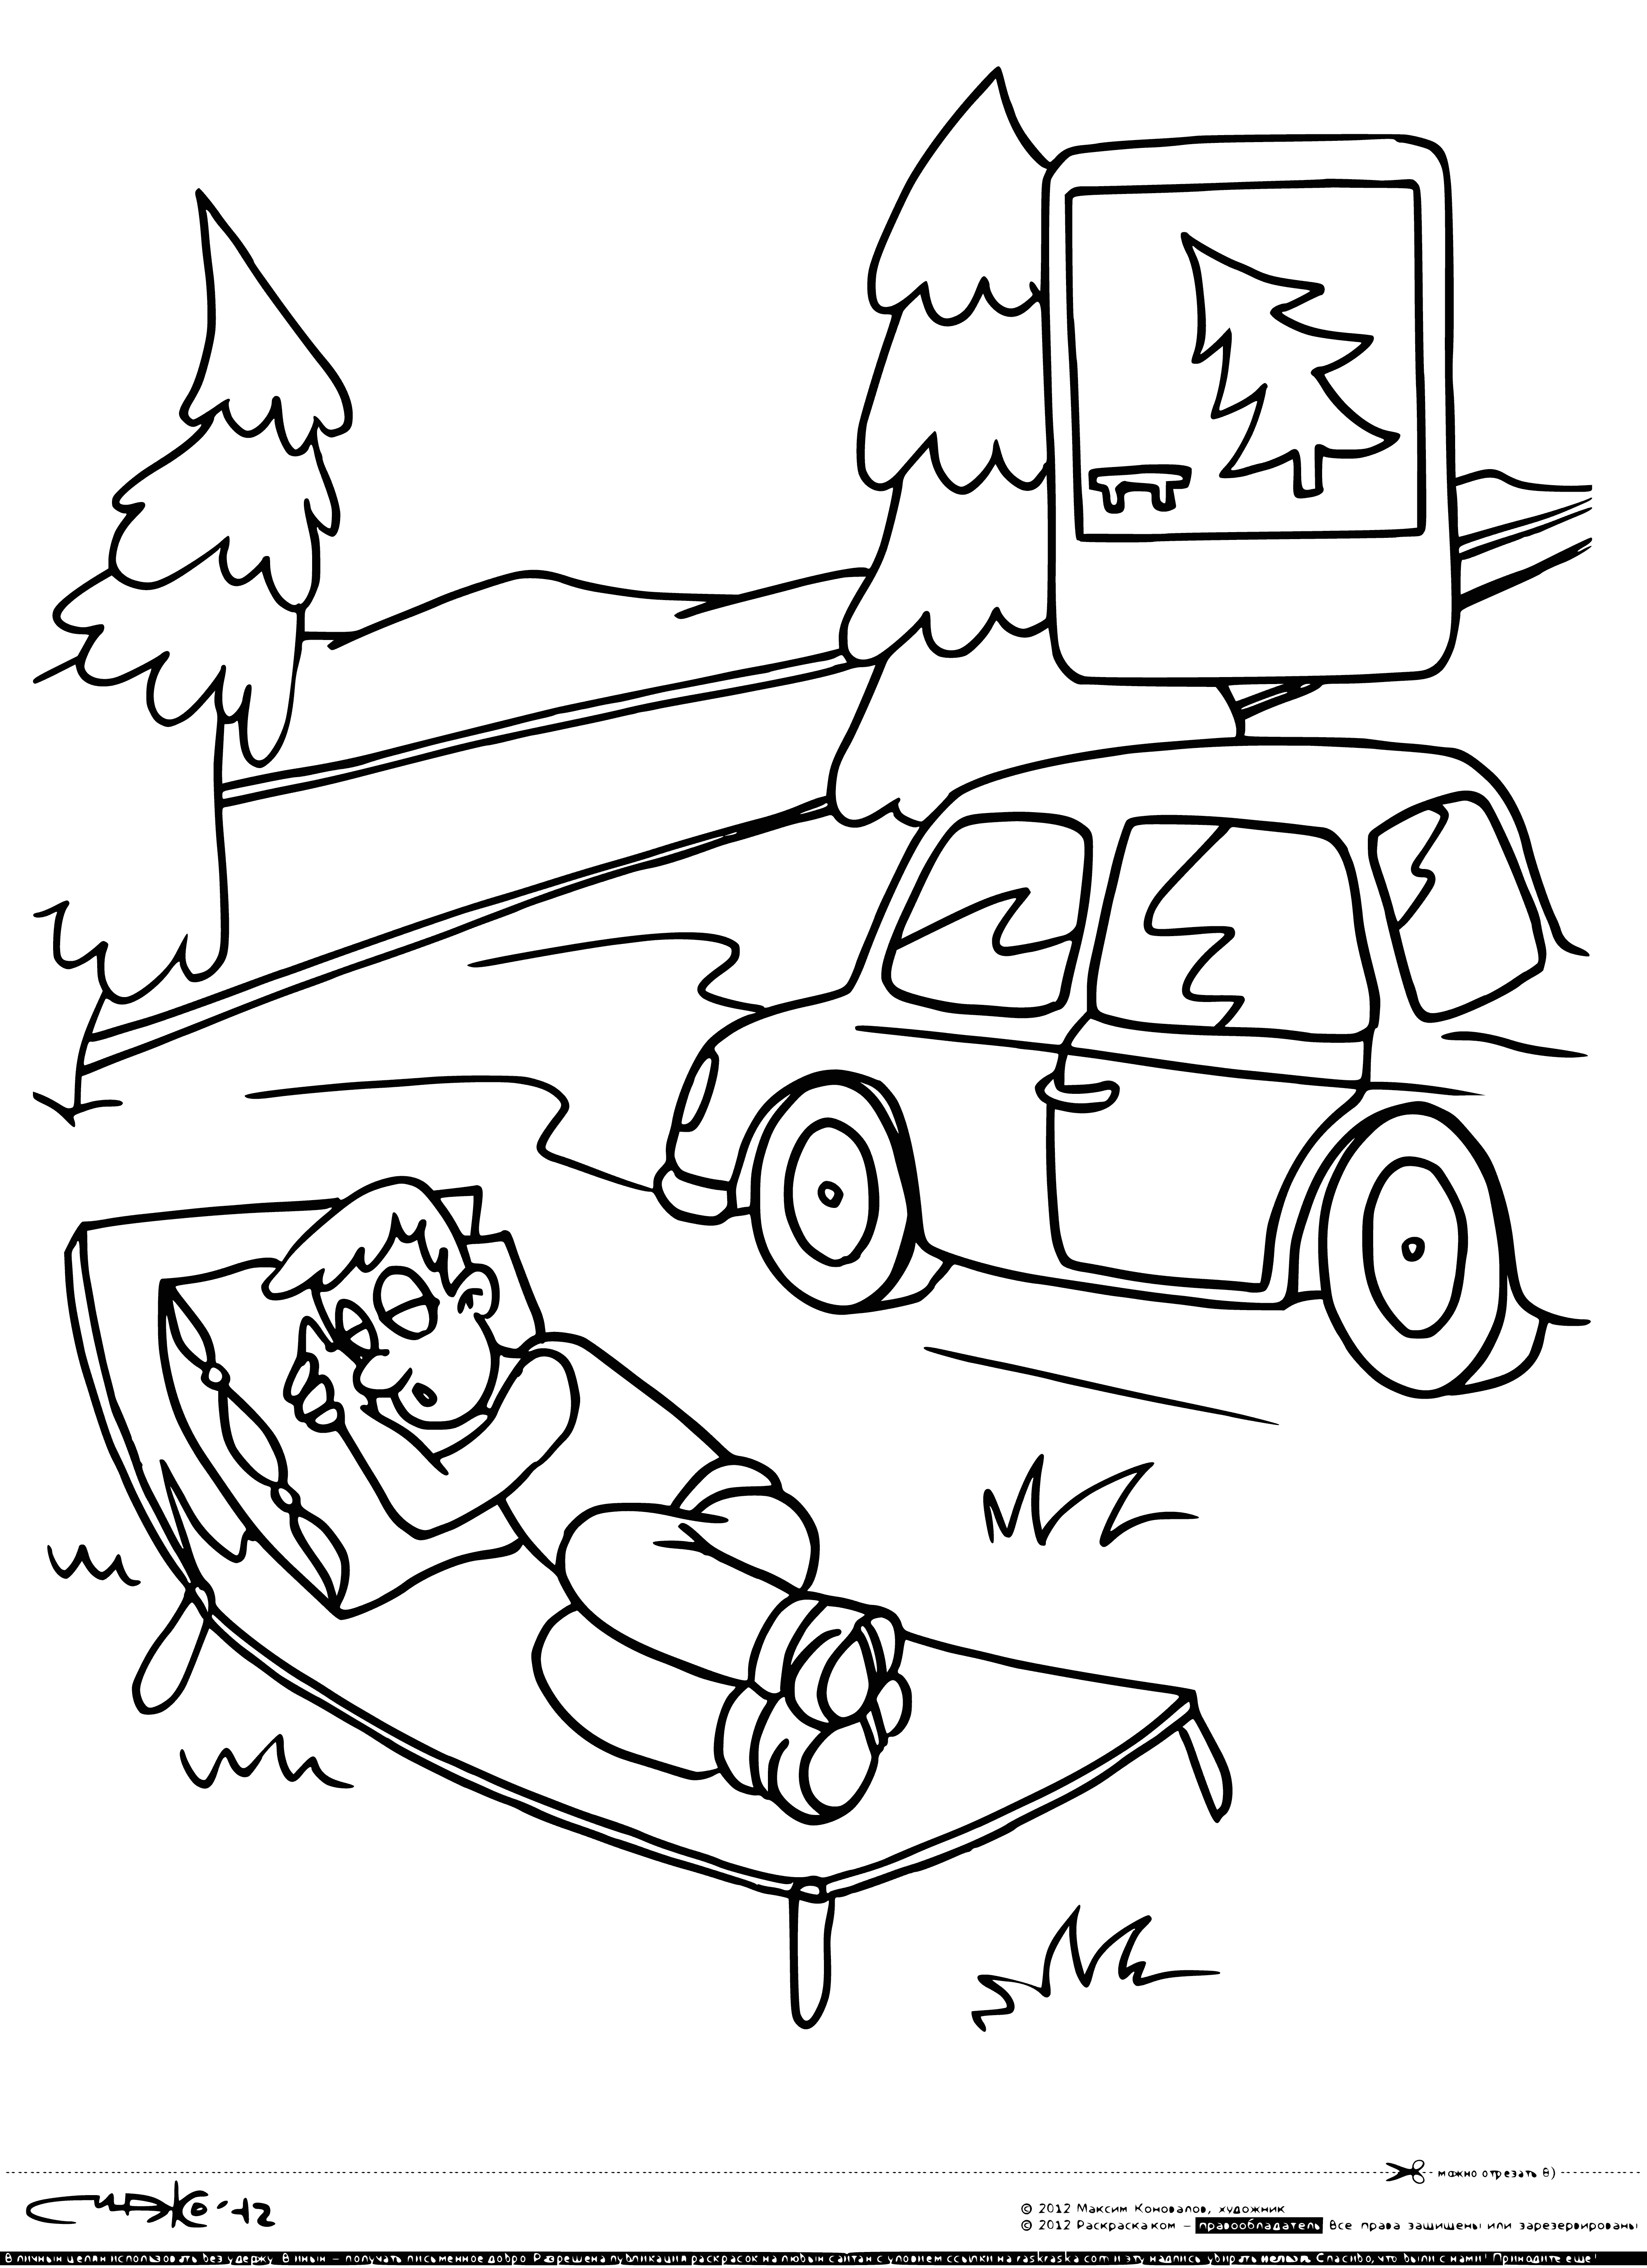 coloring page: Sign has car coloring page & 'Traffic Rules' + person pict & 'Resting Place' to show road rules. #drivesafe